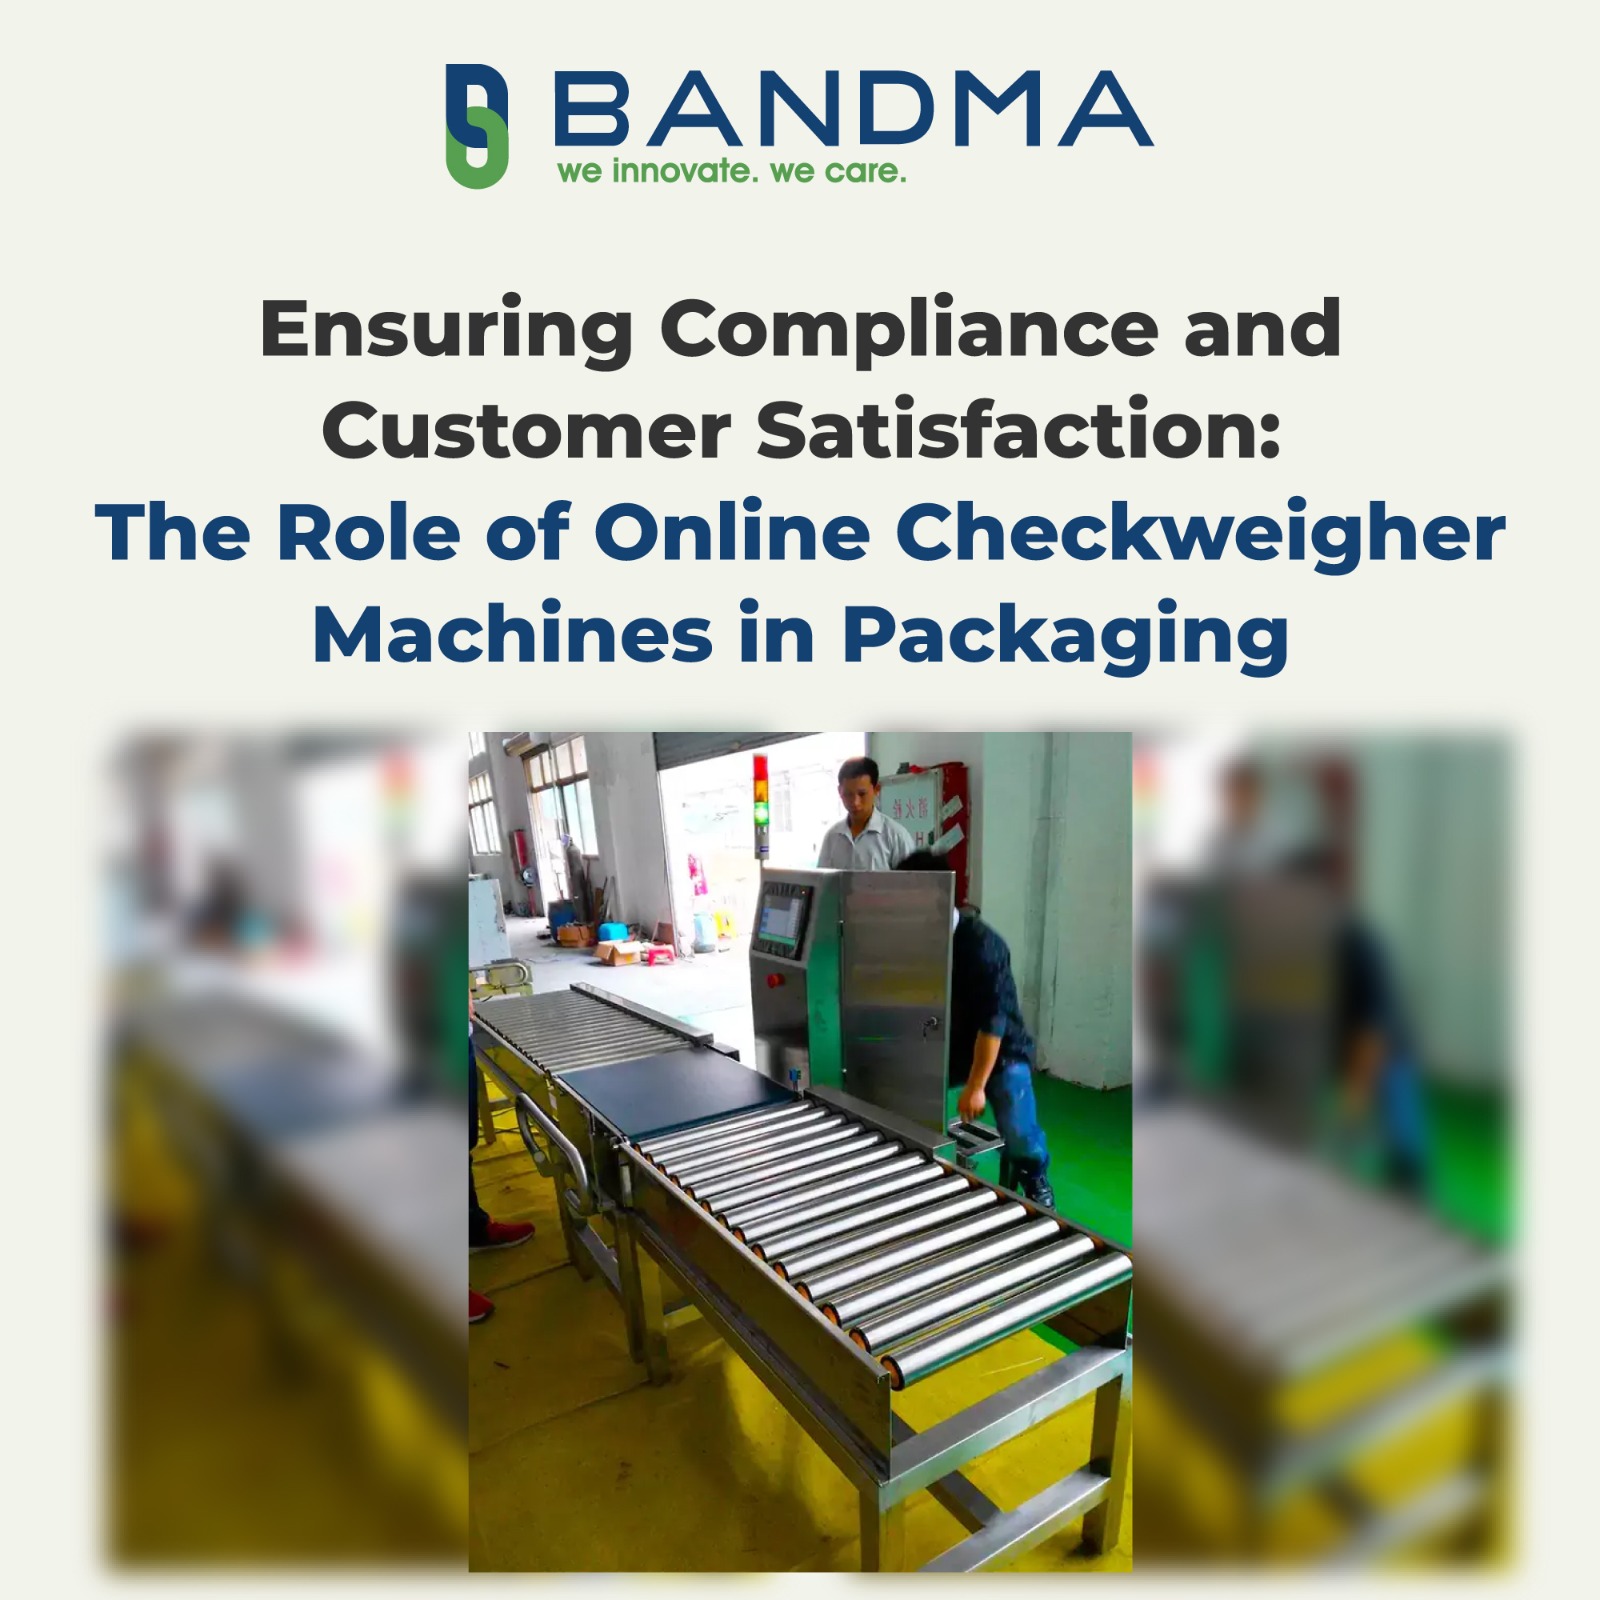 Ensuring Compliance and Customer Satisfaction: The Role of Online Checkweigher Machines in Packaging